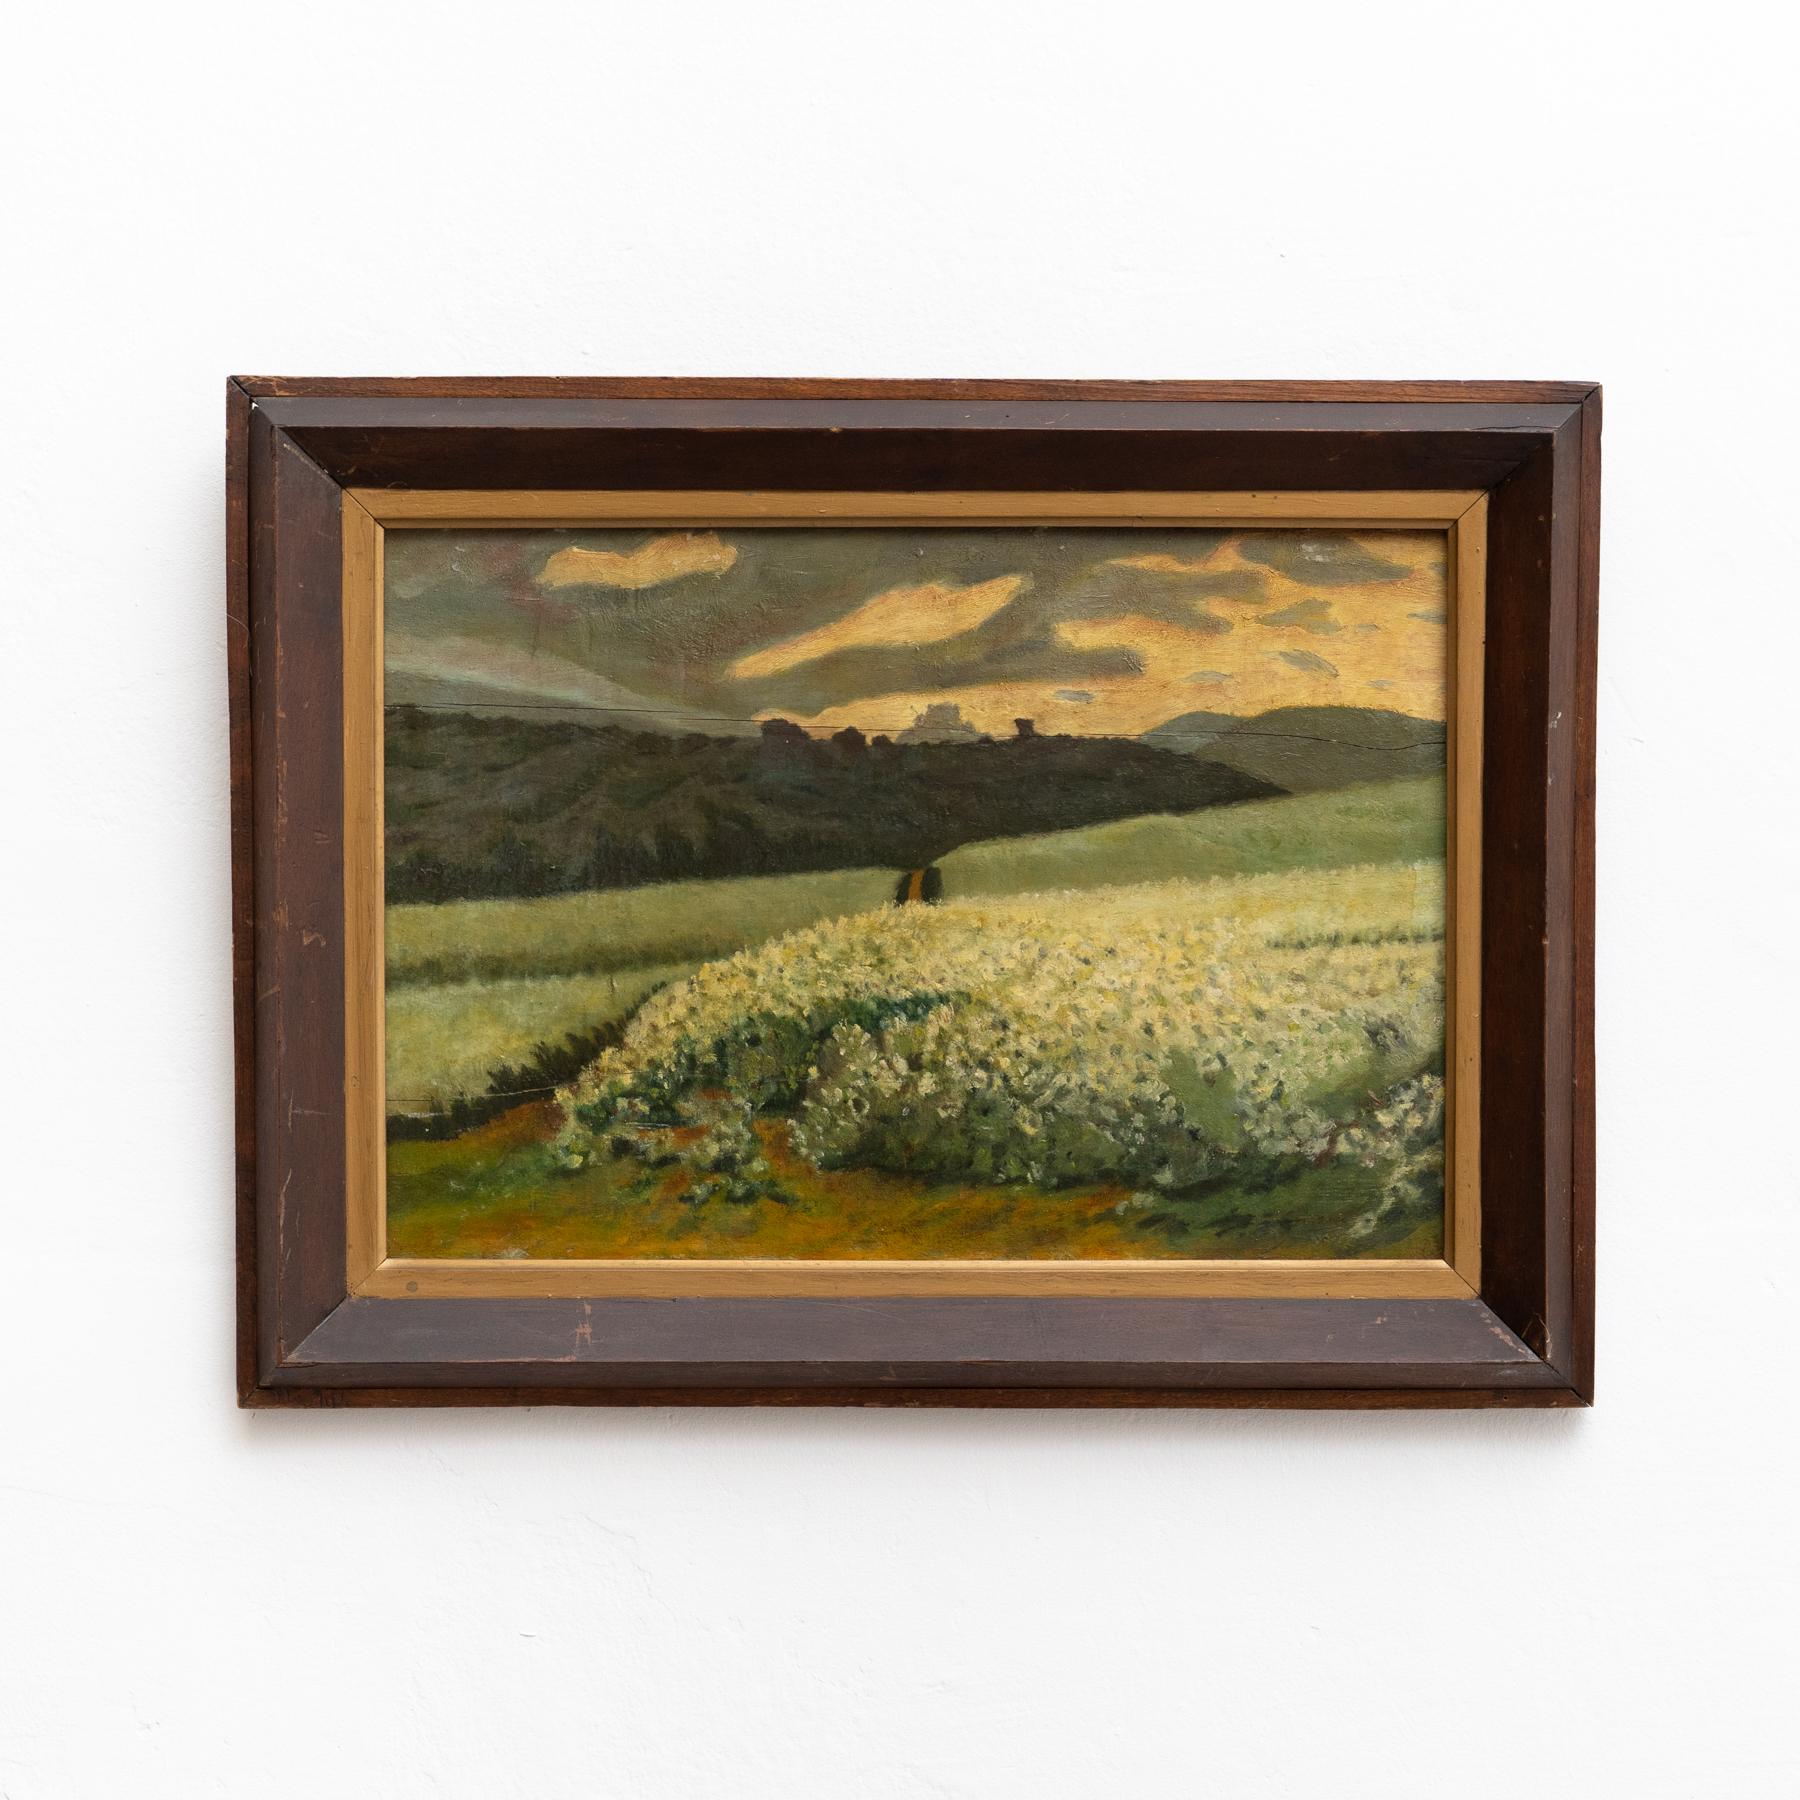 Unsigned painting by unknown artist.

Made in Spain, circa 1940

Oil on wood.

In original condition, with minor wear consistent with age and use, preserving a beautiful patina.
 